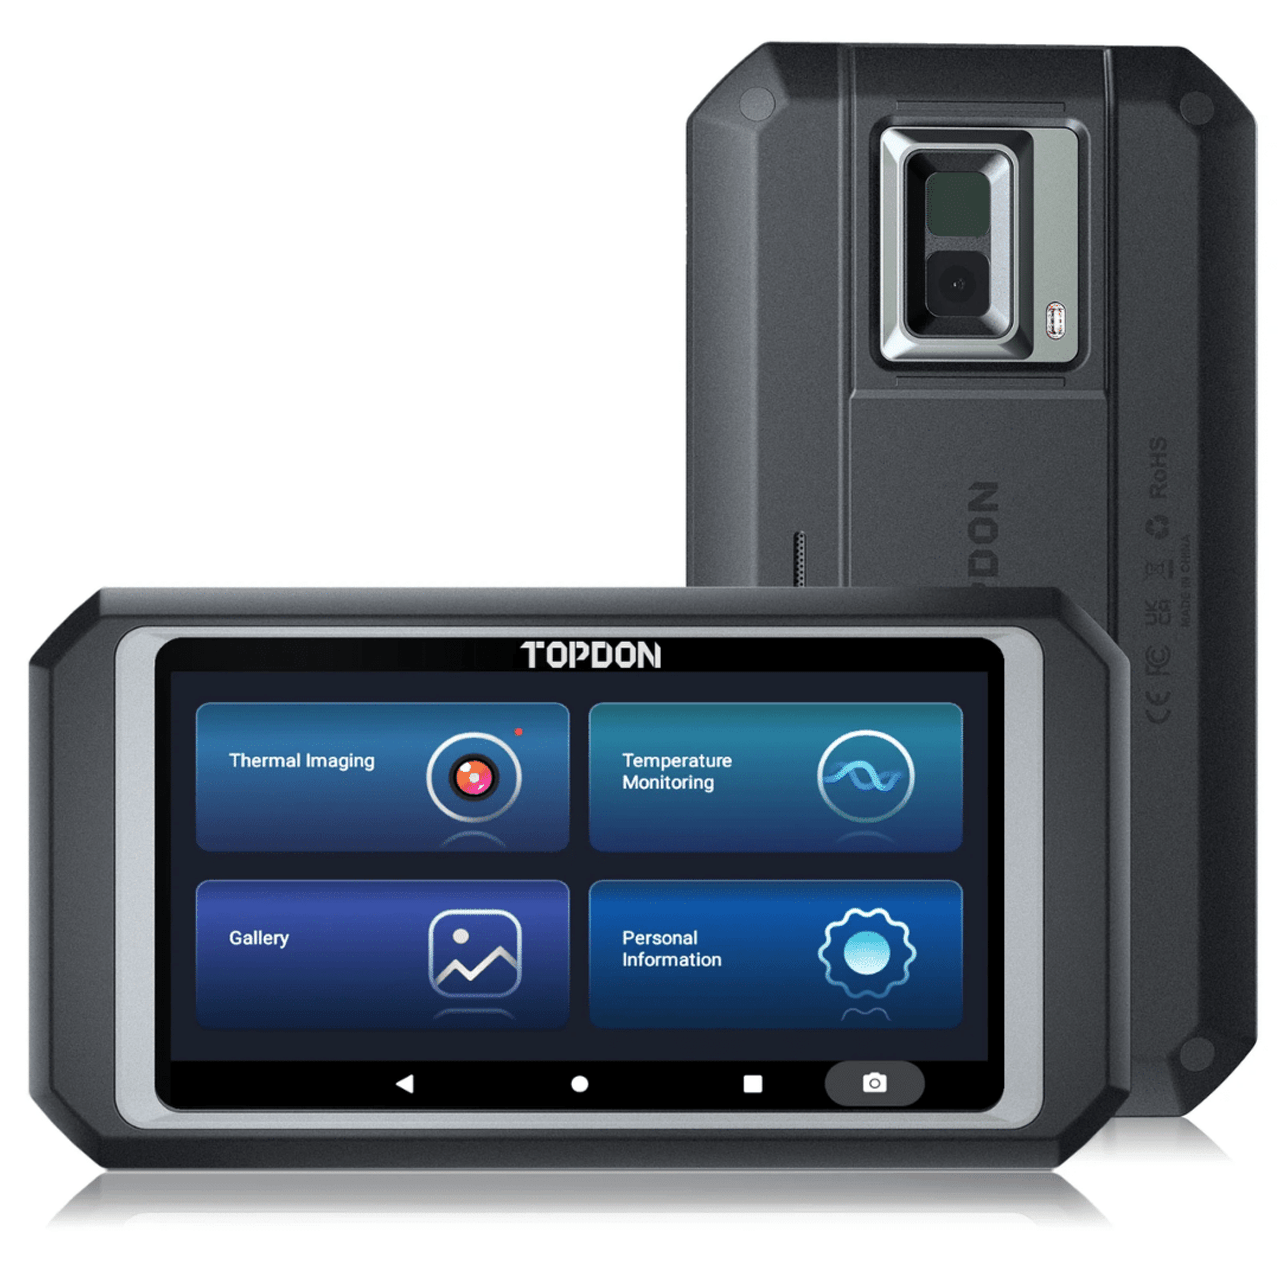 TOPDON TCView Infrared Thermal Camera